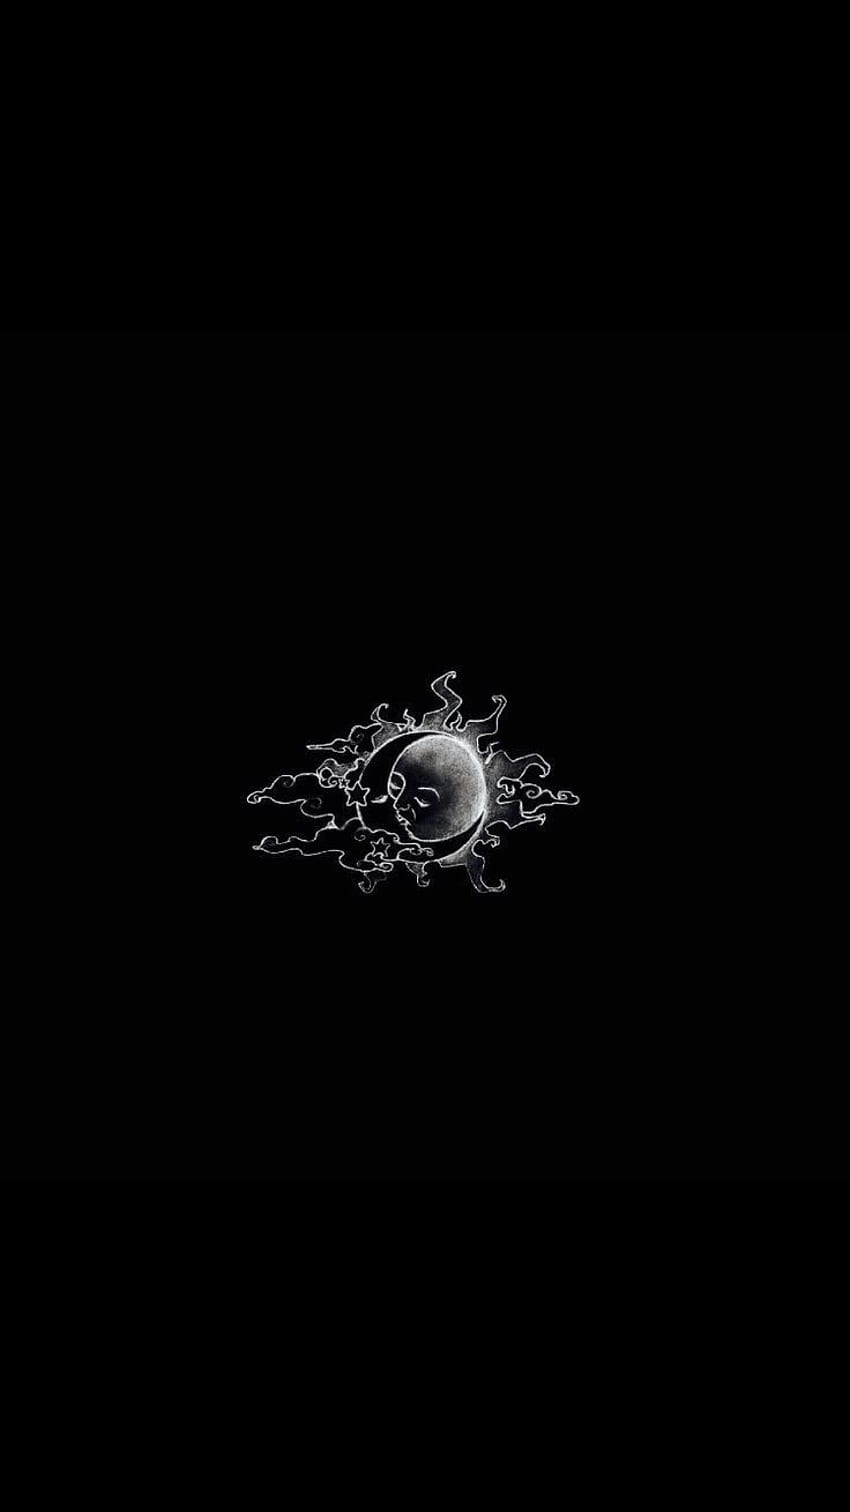 Download wallpaper 1350x2400 eclipse, moon, sun, astronomy, dark iphone  8+/7+/6s+/6+ for parallax hd background